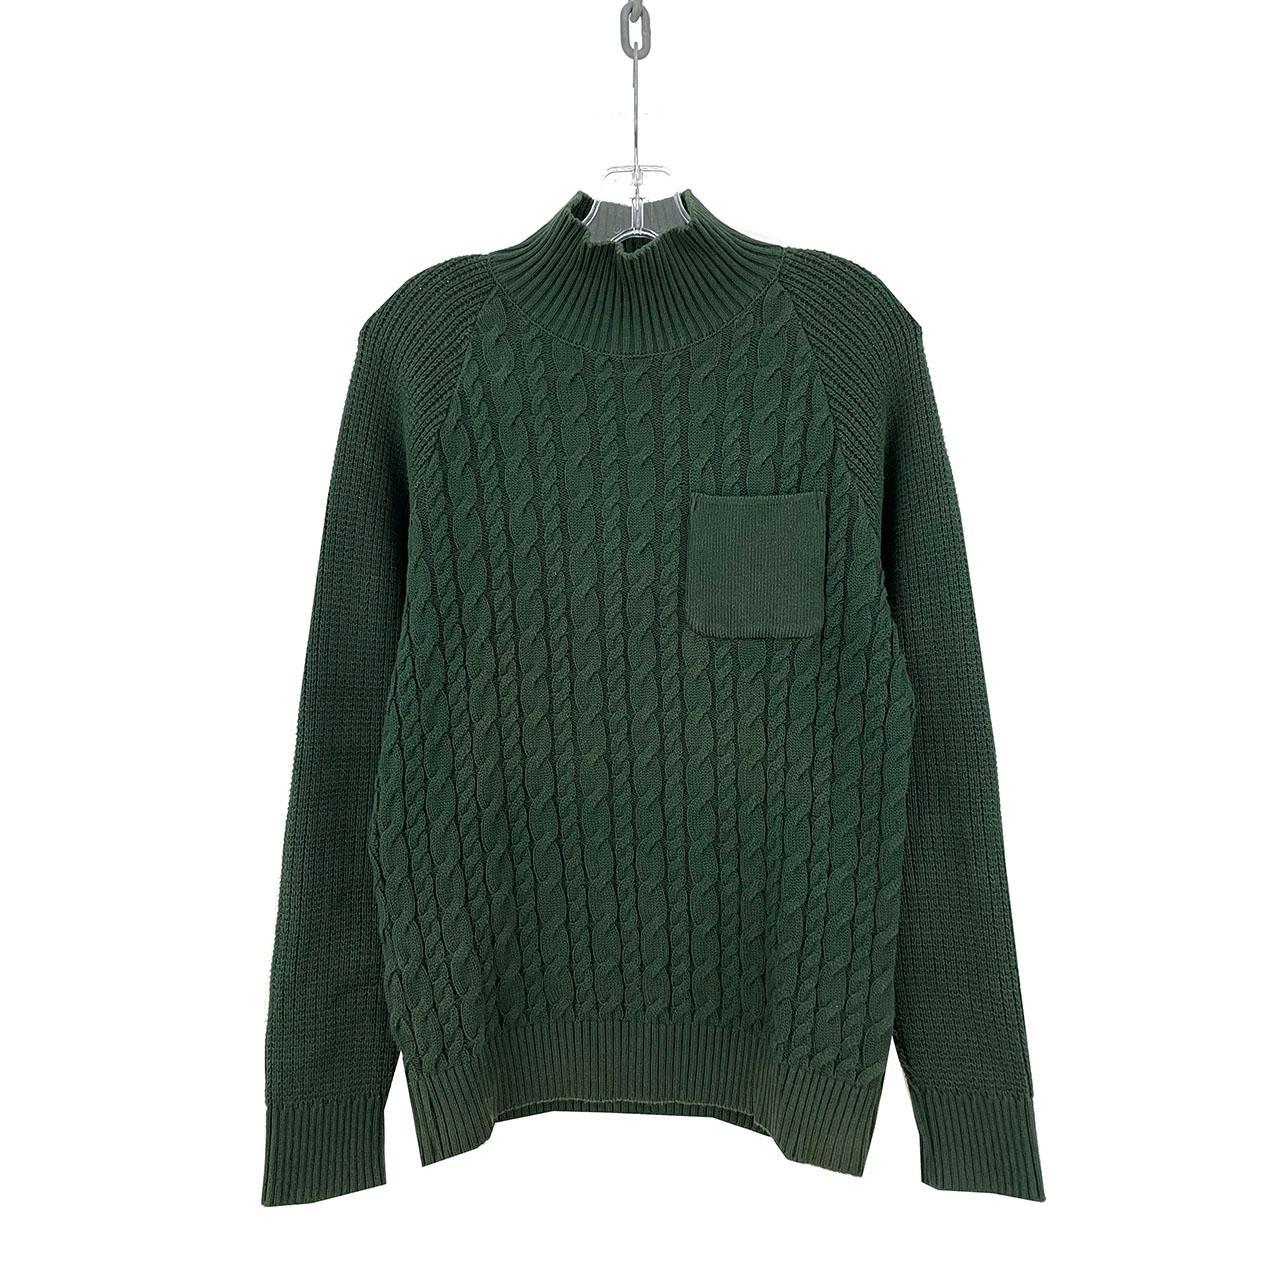 Undercover AW12 Psycho Color Knit Sweater Beautiful... - Depop